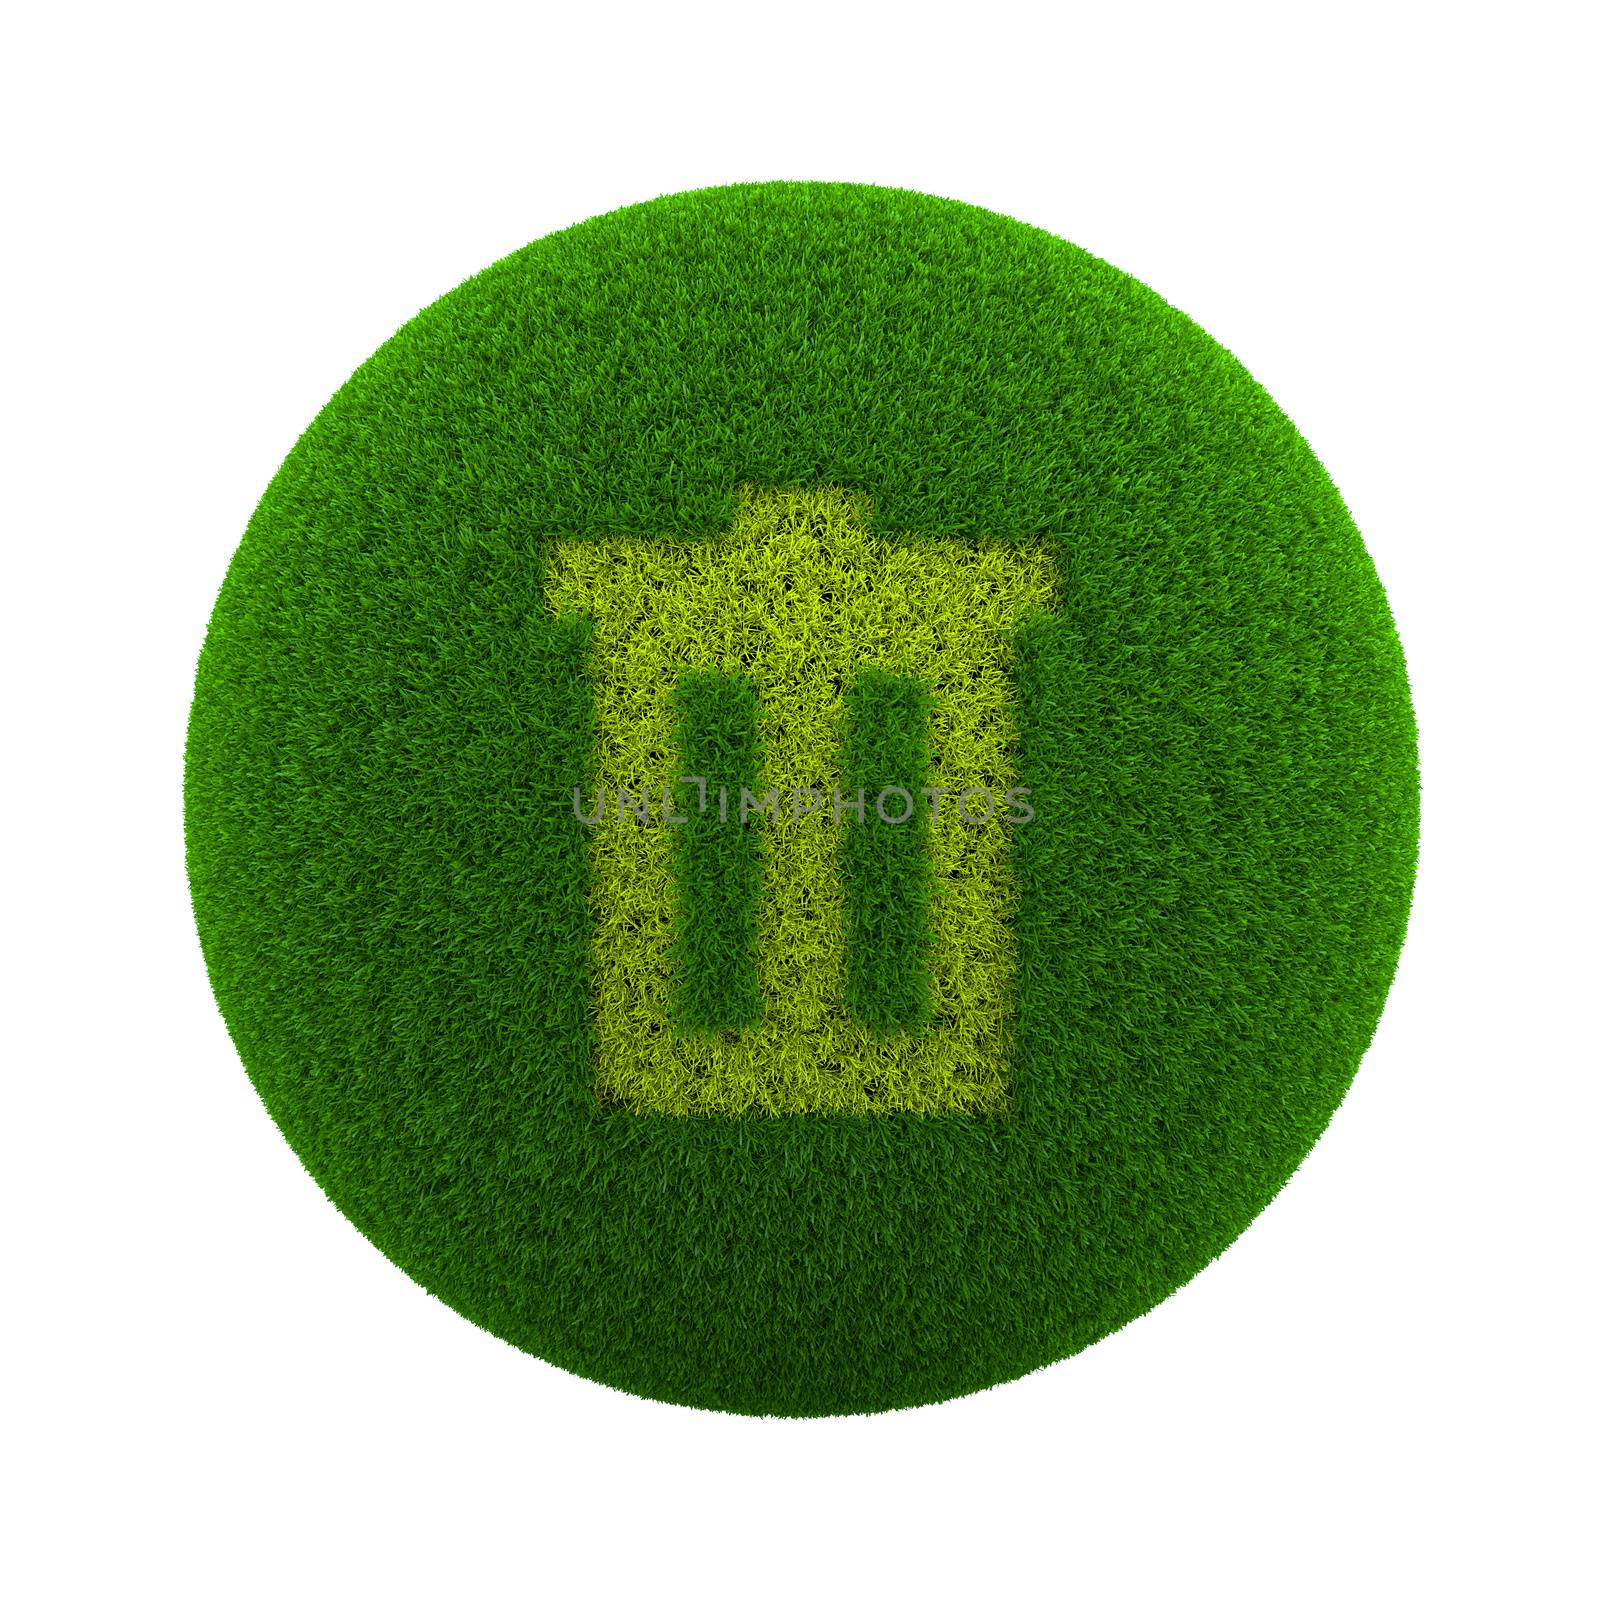 Green Globe with Grass Cutted in the Shape of a Trash Can Symbol 3D Illustration Isolated on White Background